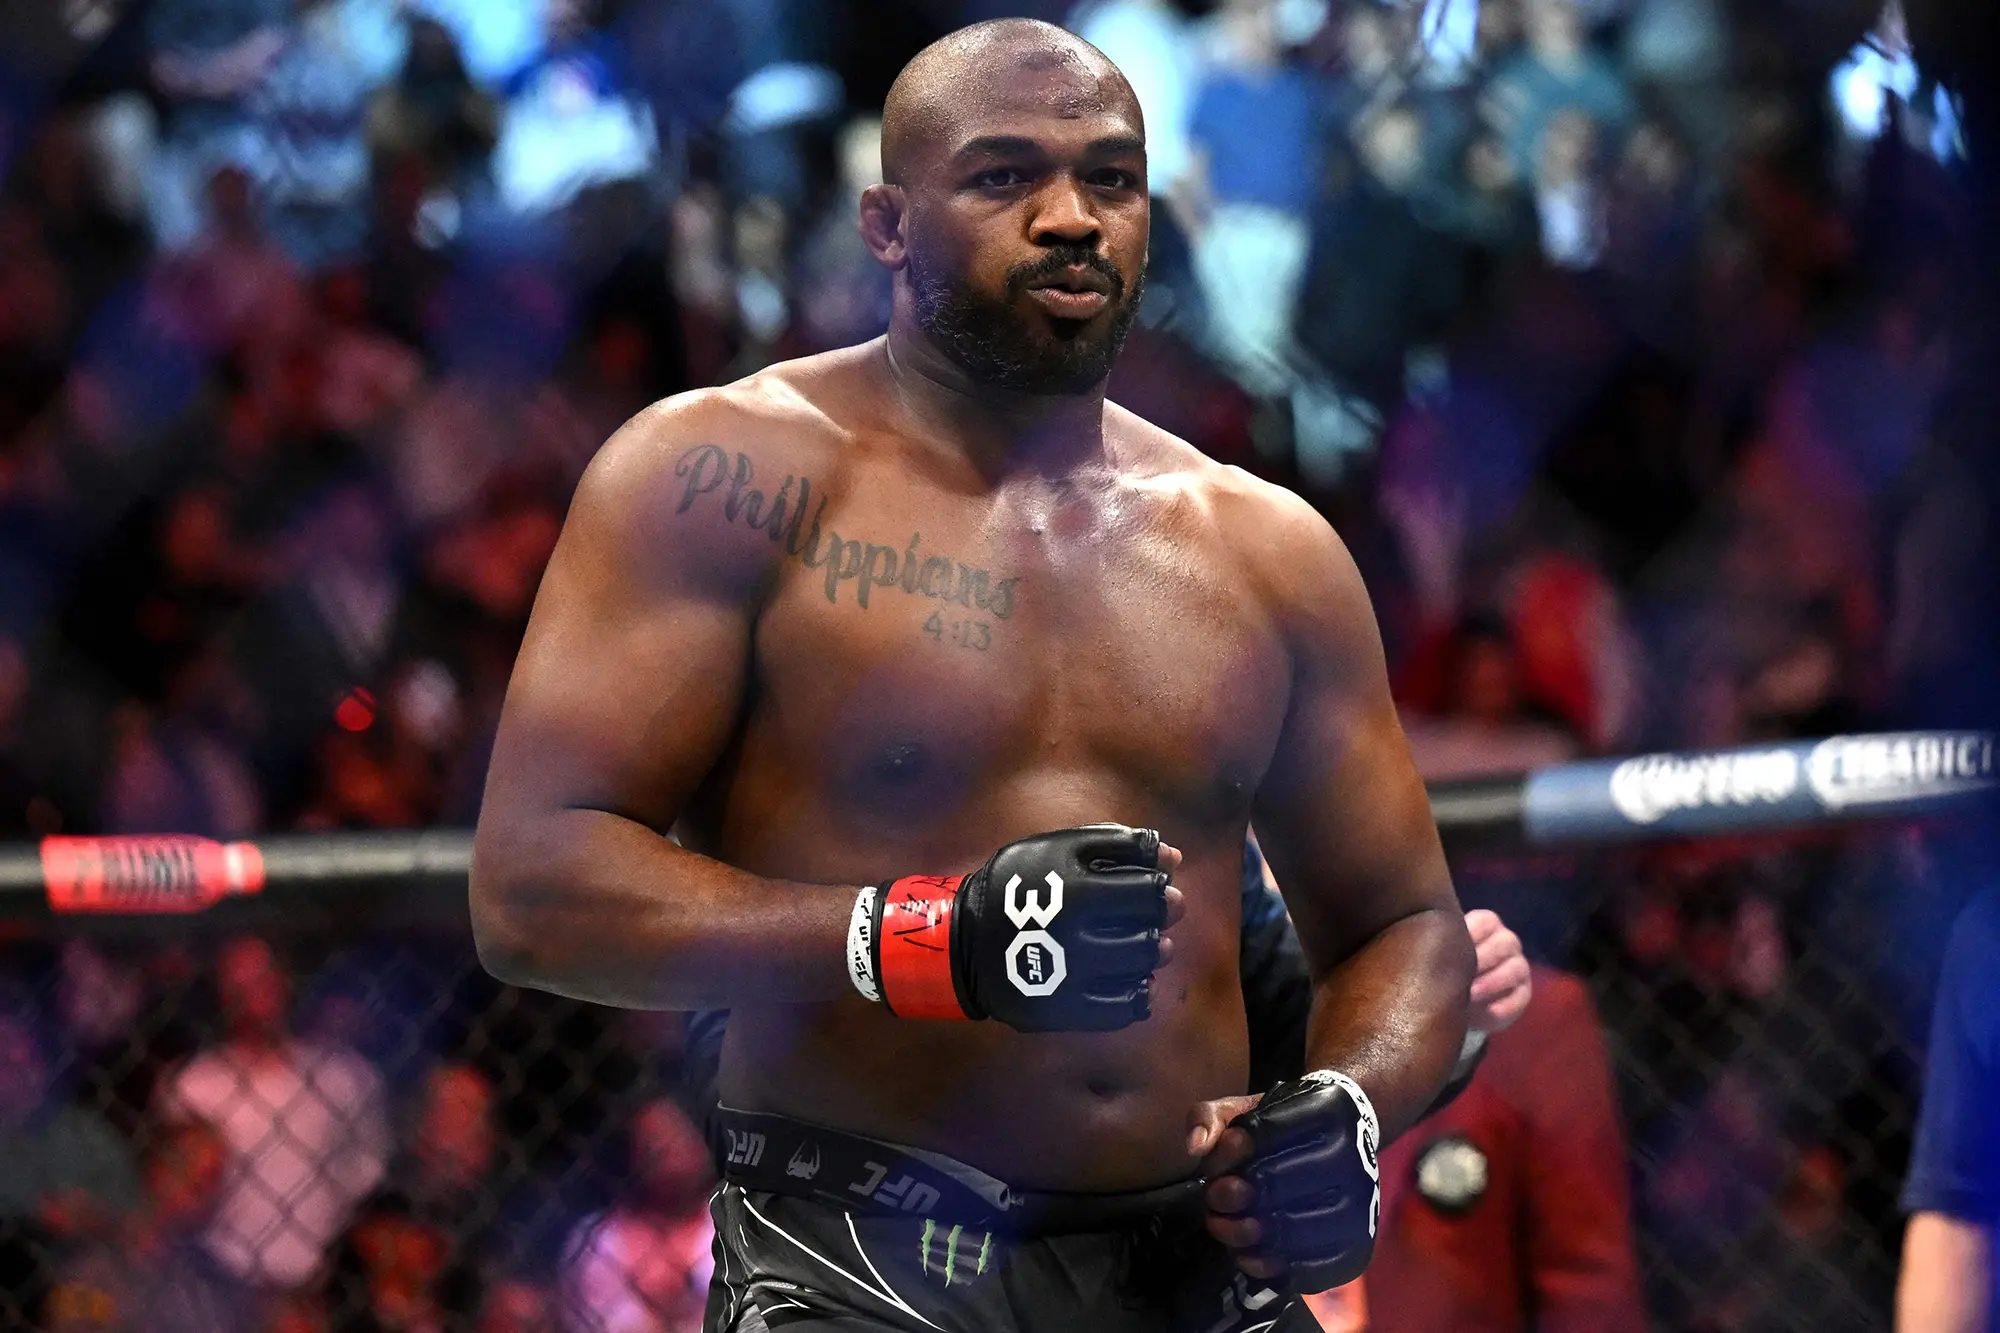 Jon Jones Discloses Offer to Fight at UFC 300: "We Both Acknowledged I Wasn't Prepared"